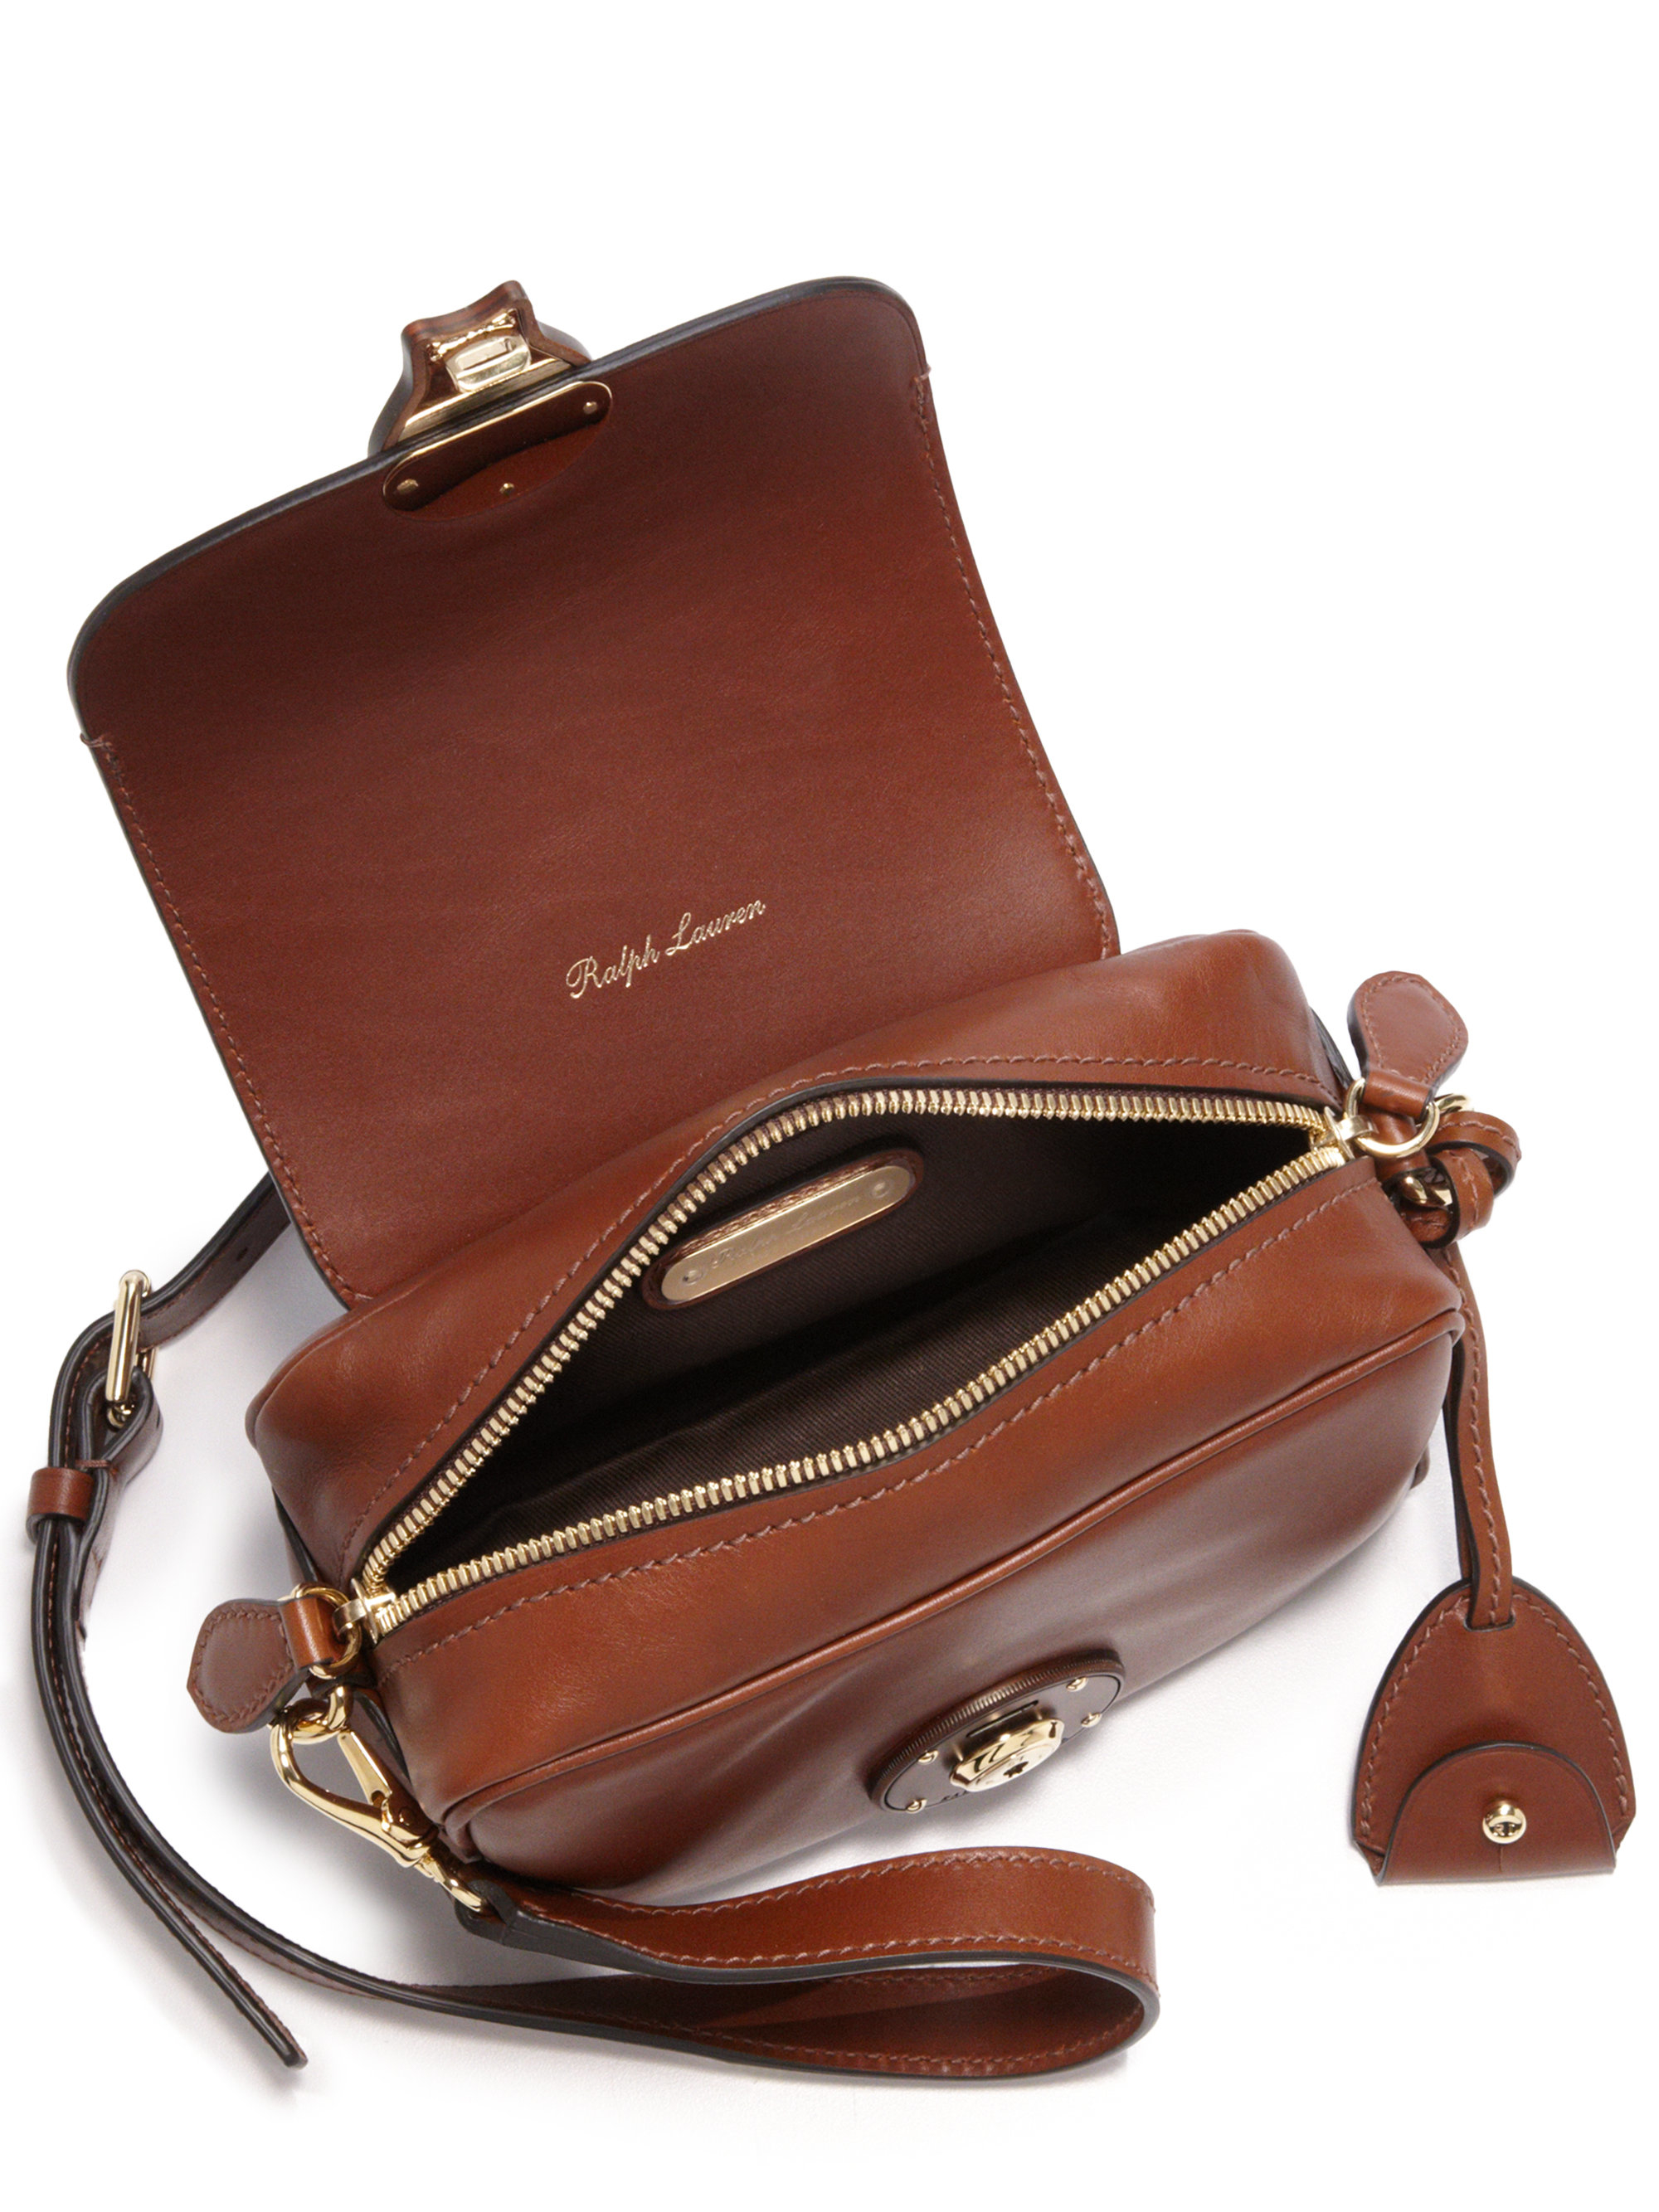 Lyst - Ralph Lauren Ricky Extra-small Leather Zip Crossbody Bag in Brown